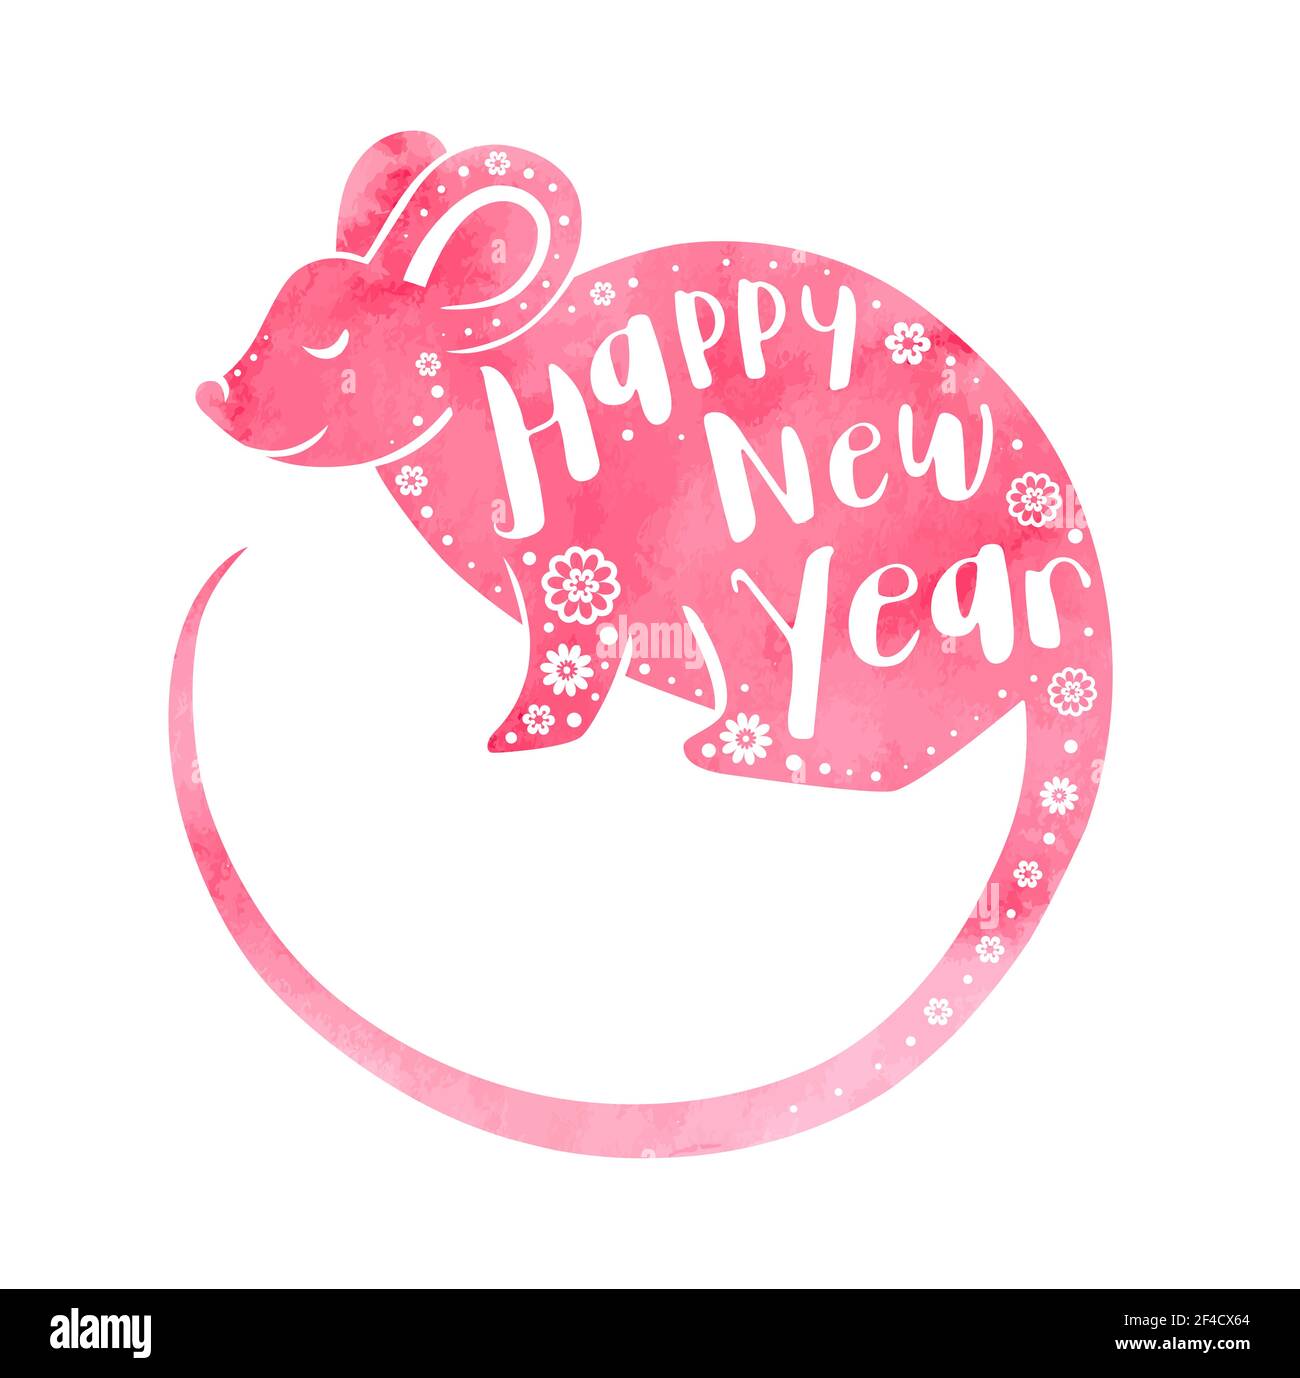 Cute rat symbol of Chinese zodiac for 2020 new year. Pink watercolor silhouette of rat and lettering. Vector illustration Stock Vector